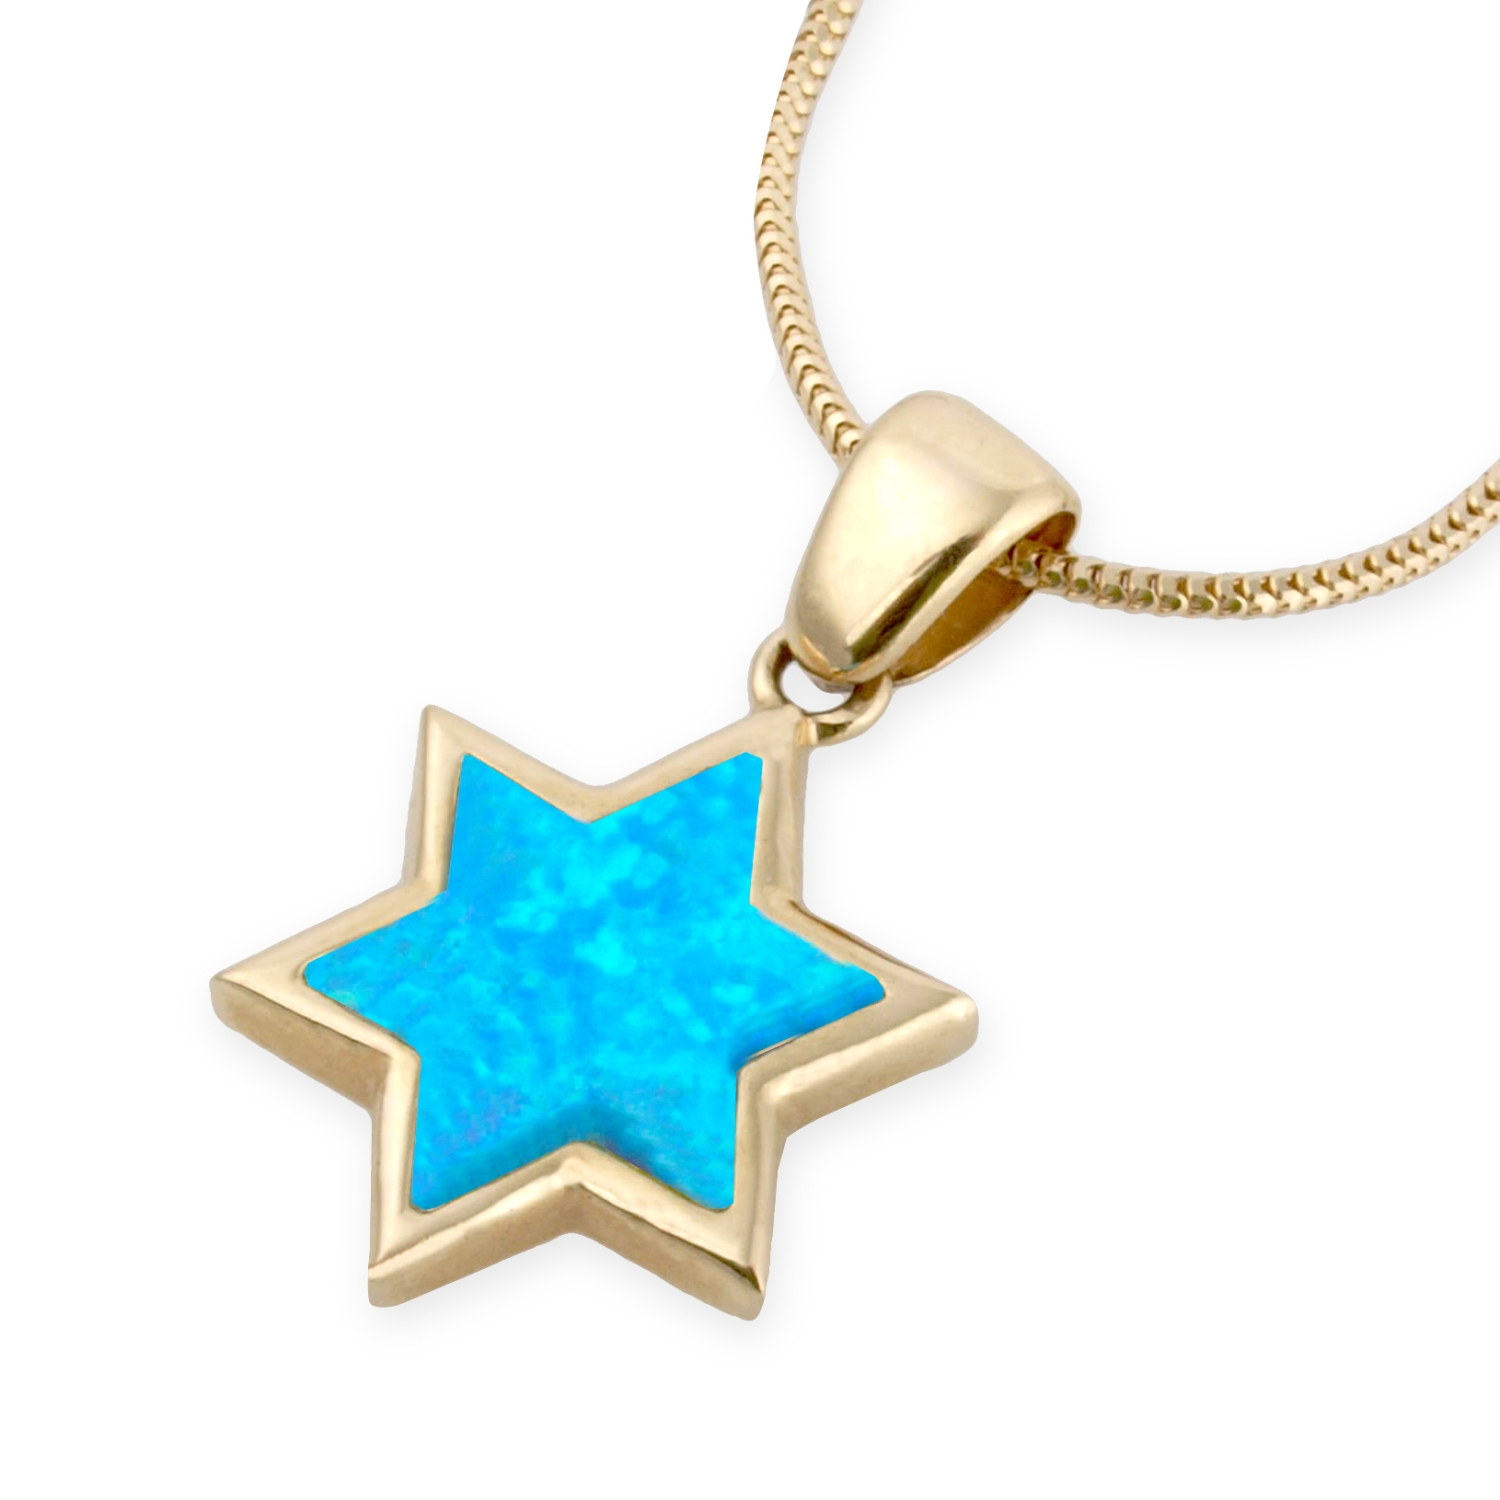 14K Gold Star of David with Opalite Filling - 2